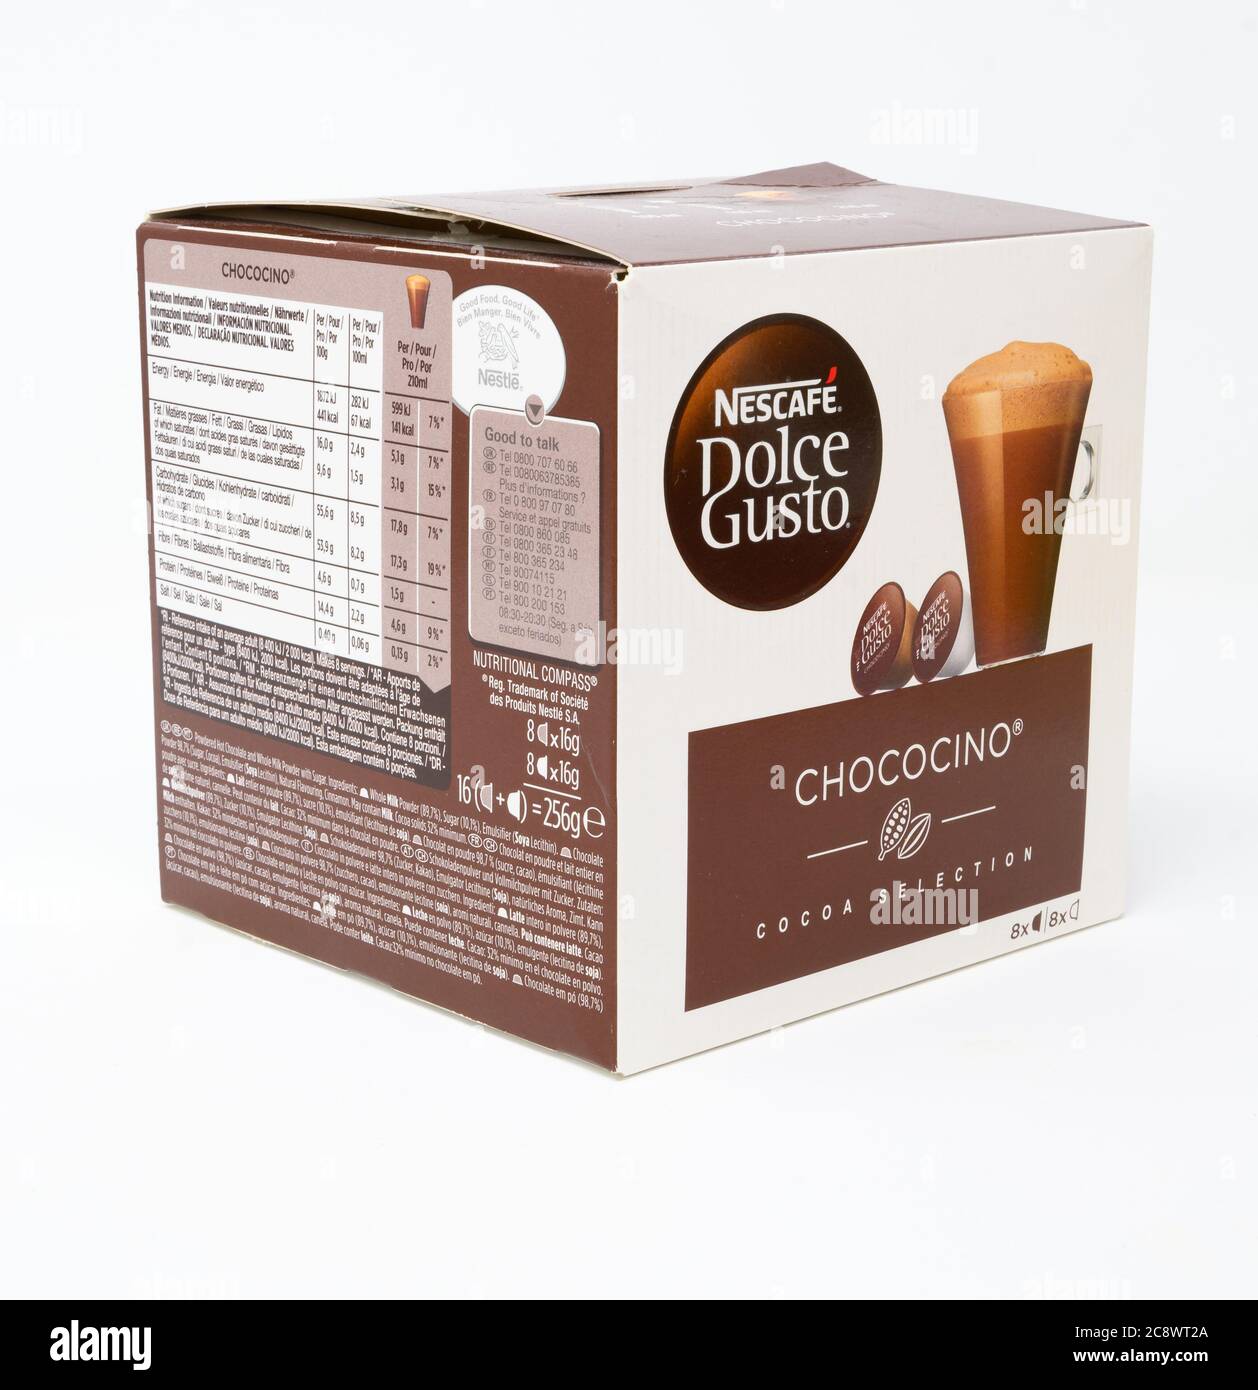 Dolce Gusto - Chococino - 3x 16 Pods